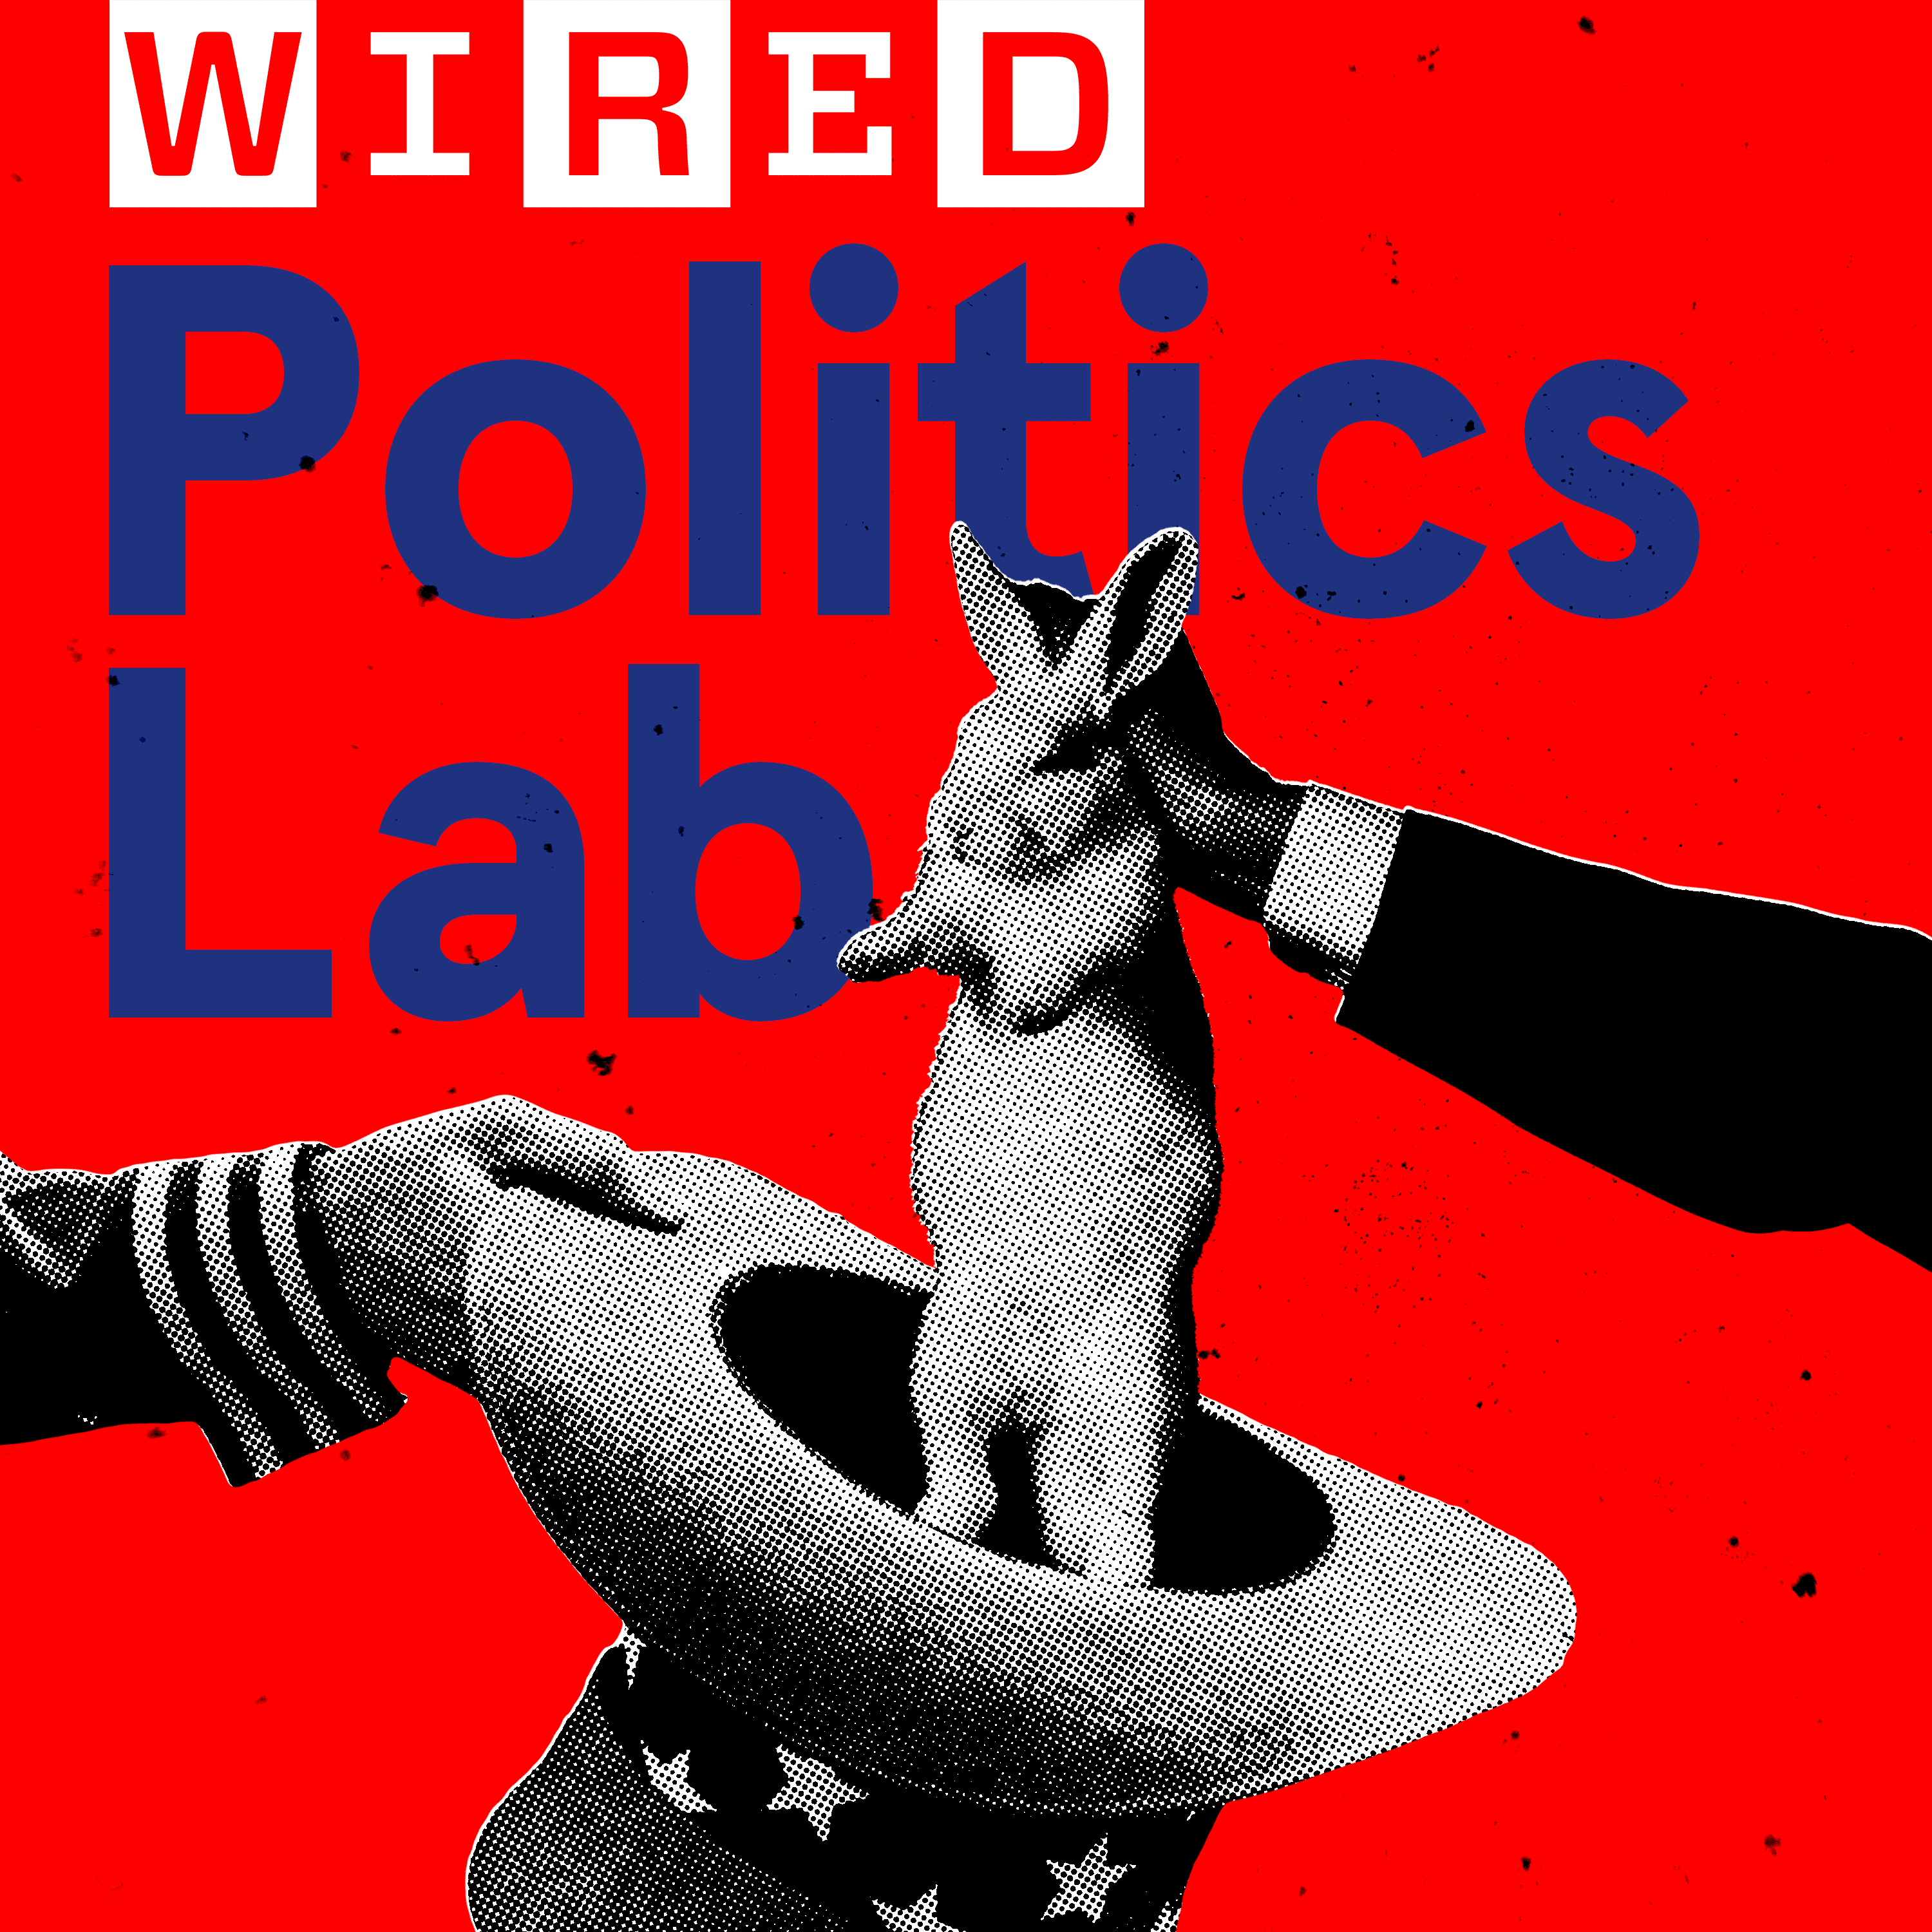 Thumbnail for "New Podcast: WIRED Politics Lab".